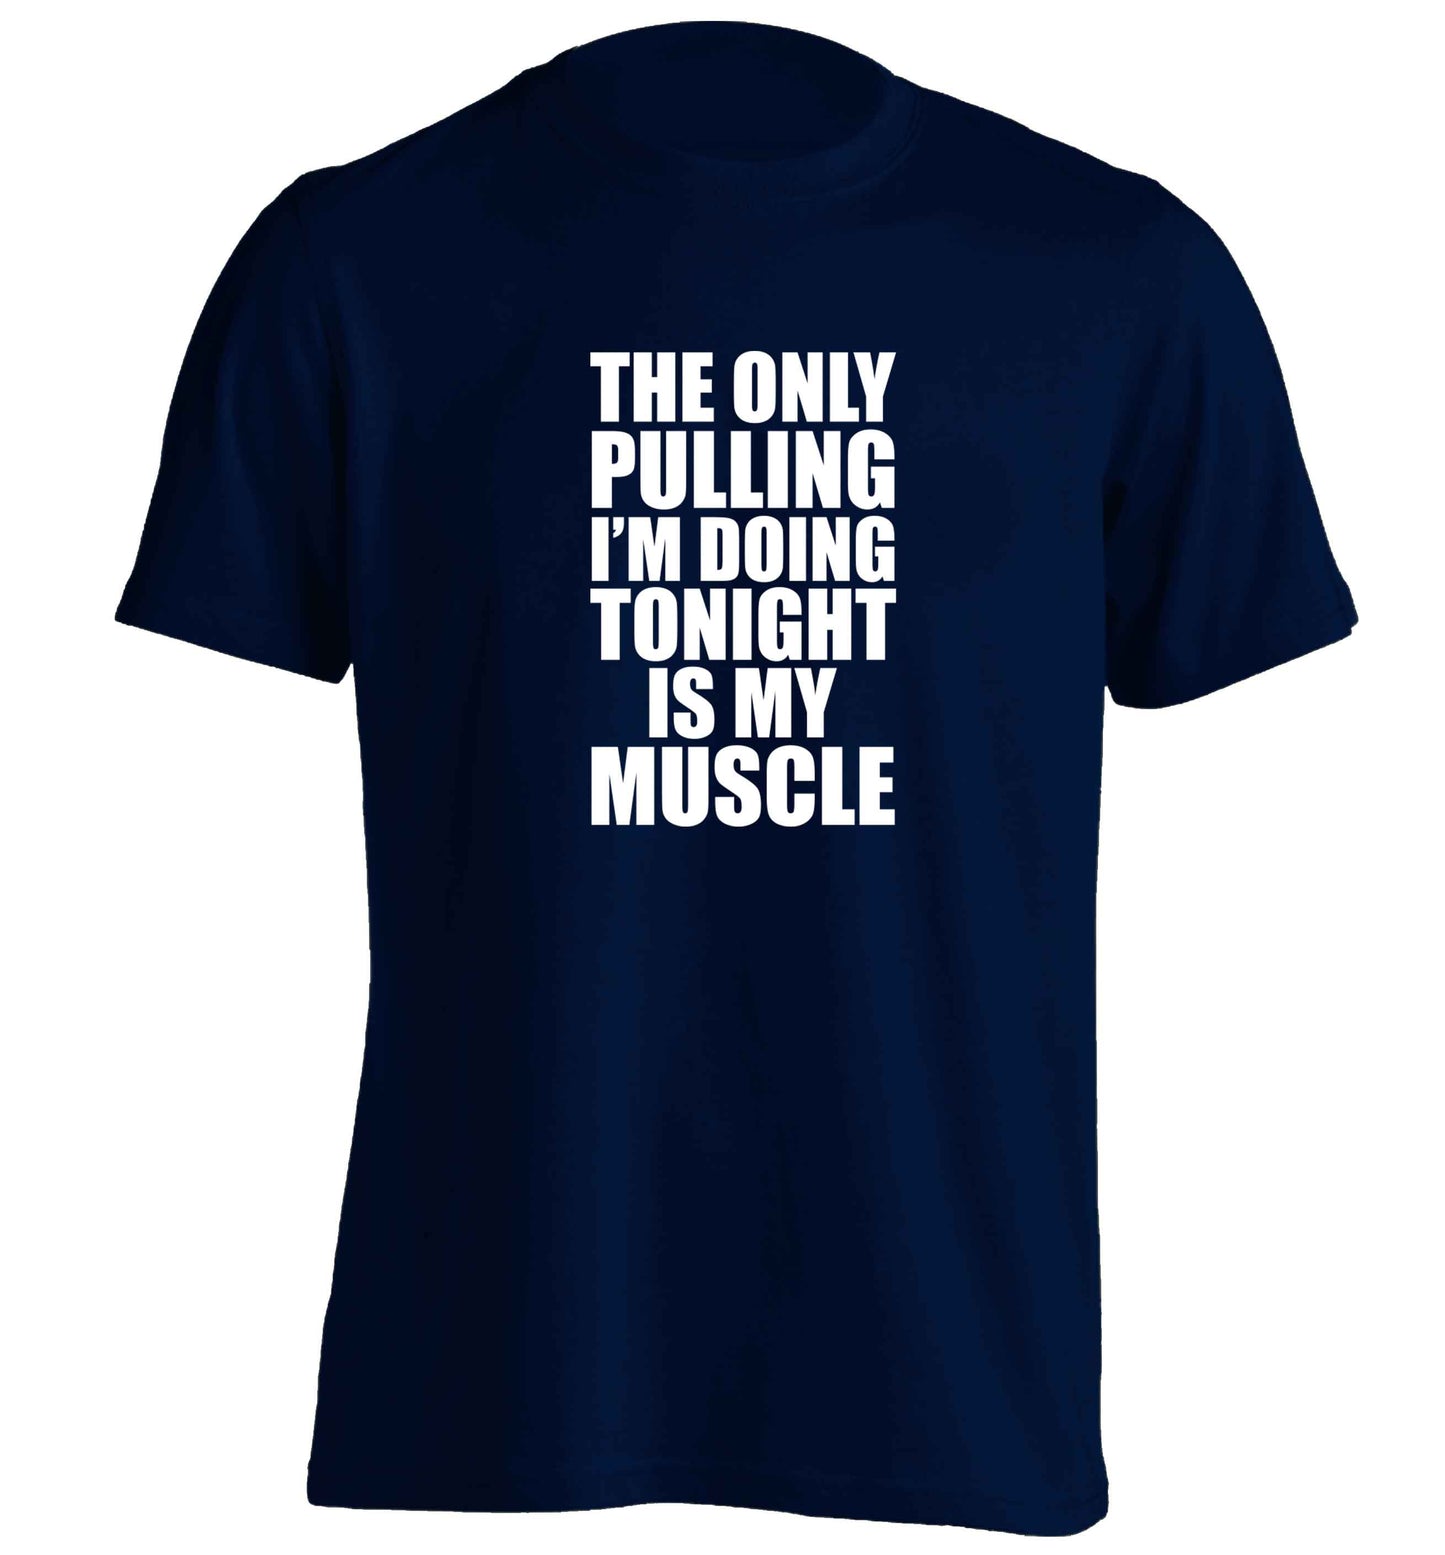 The only pulling I'm doing tonight is my muscle adults unisex navy Tshirt 2XL